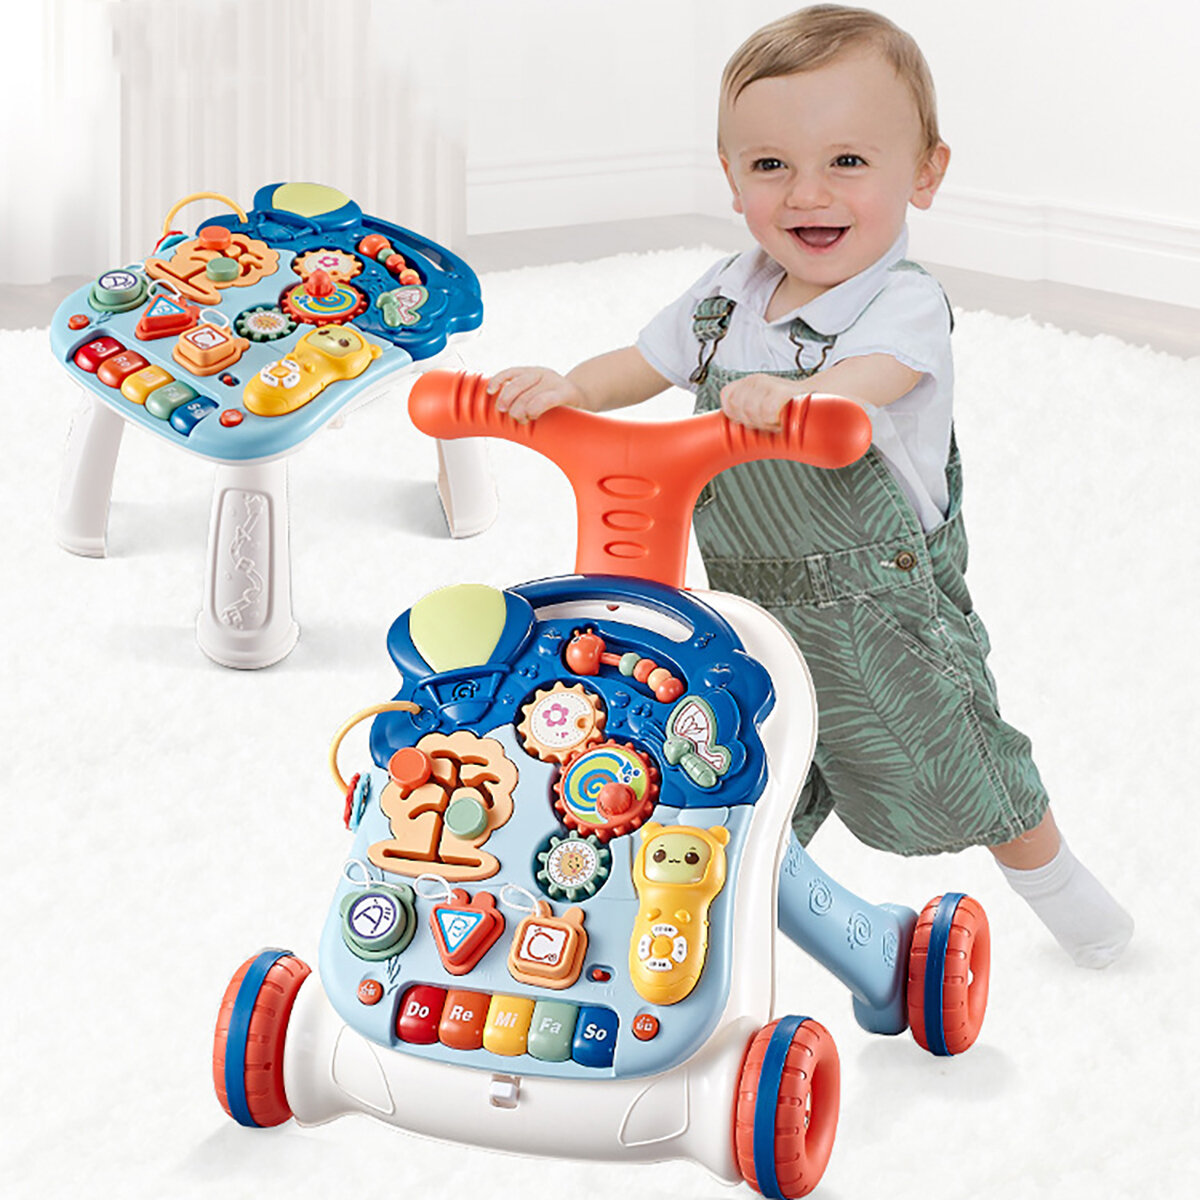 2-in-1 Baby Sit-to-Stand Activity Toy For Toddler Kids Walking Learning Safe Walkers